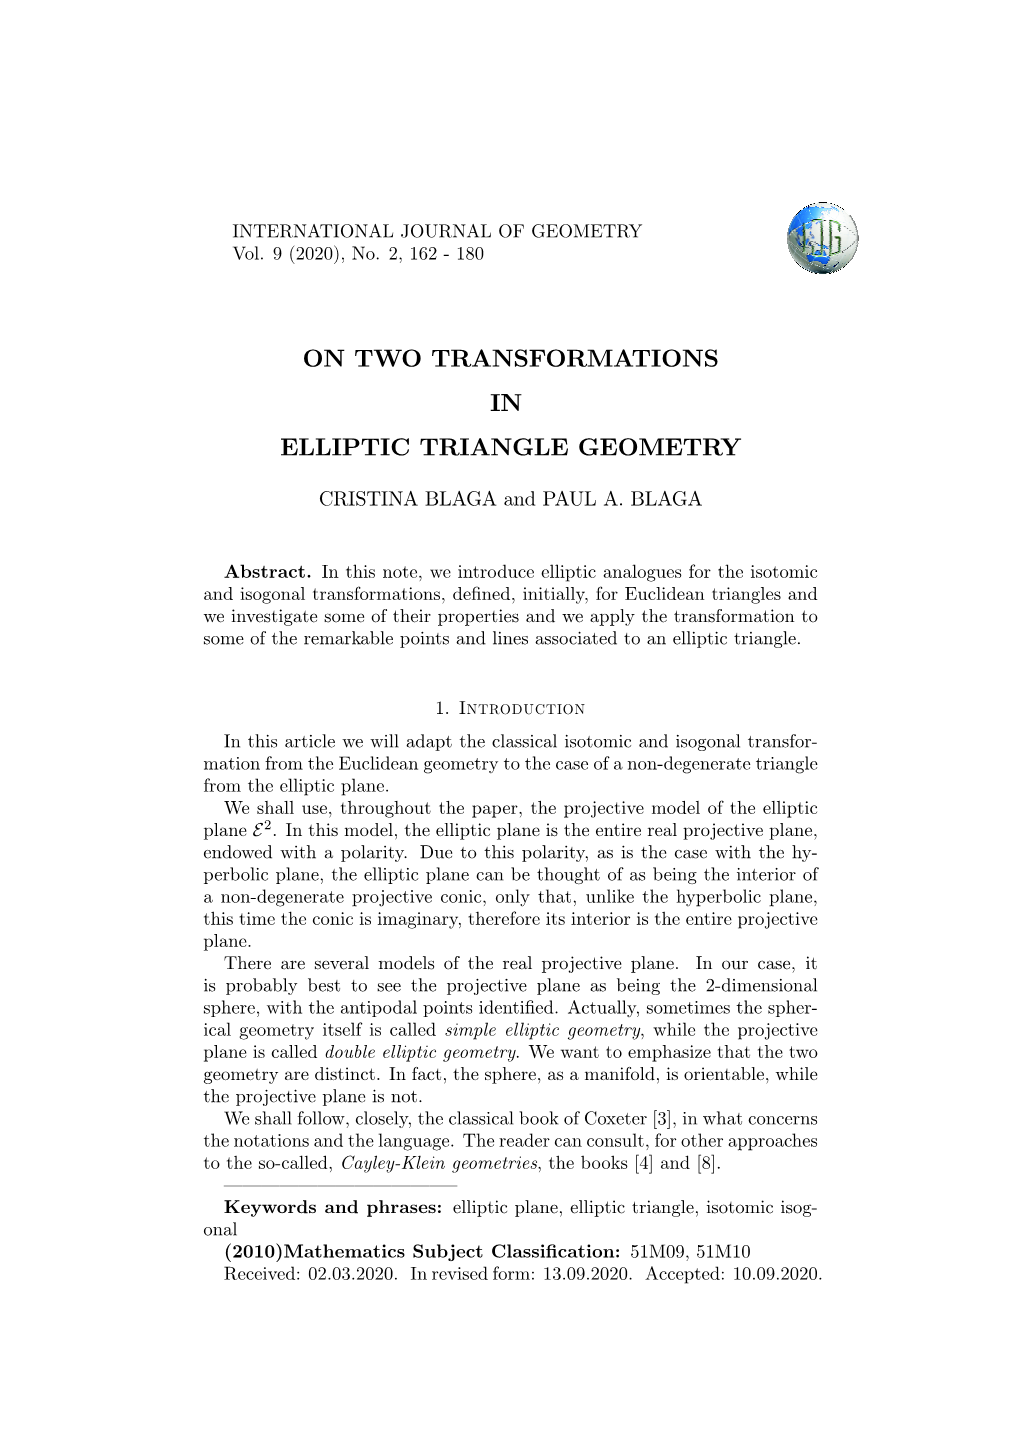 On Two Transformations in Elliptic Triangle Geometry